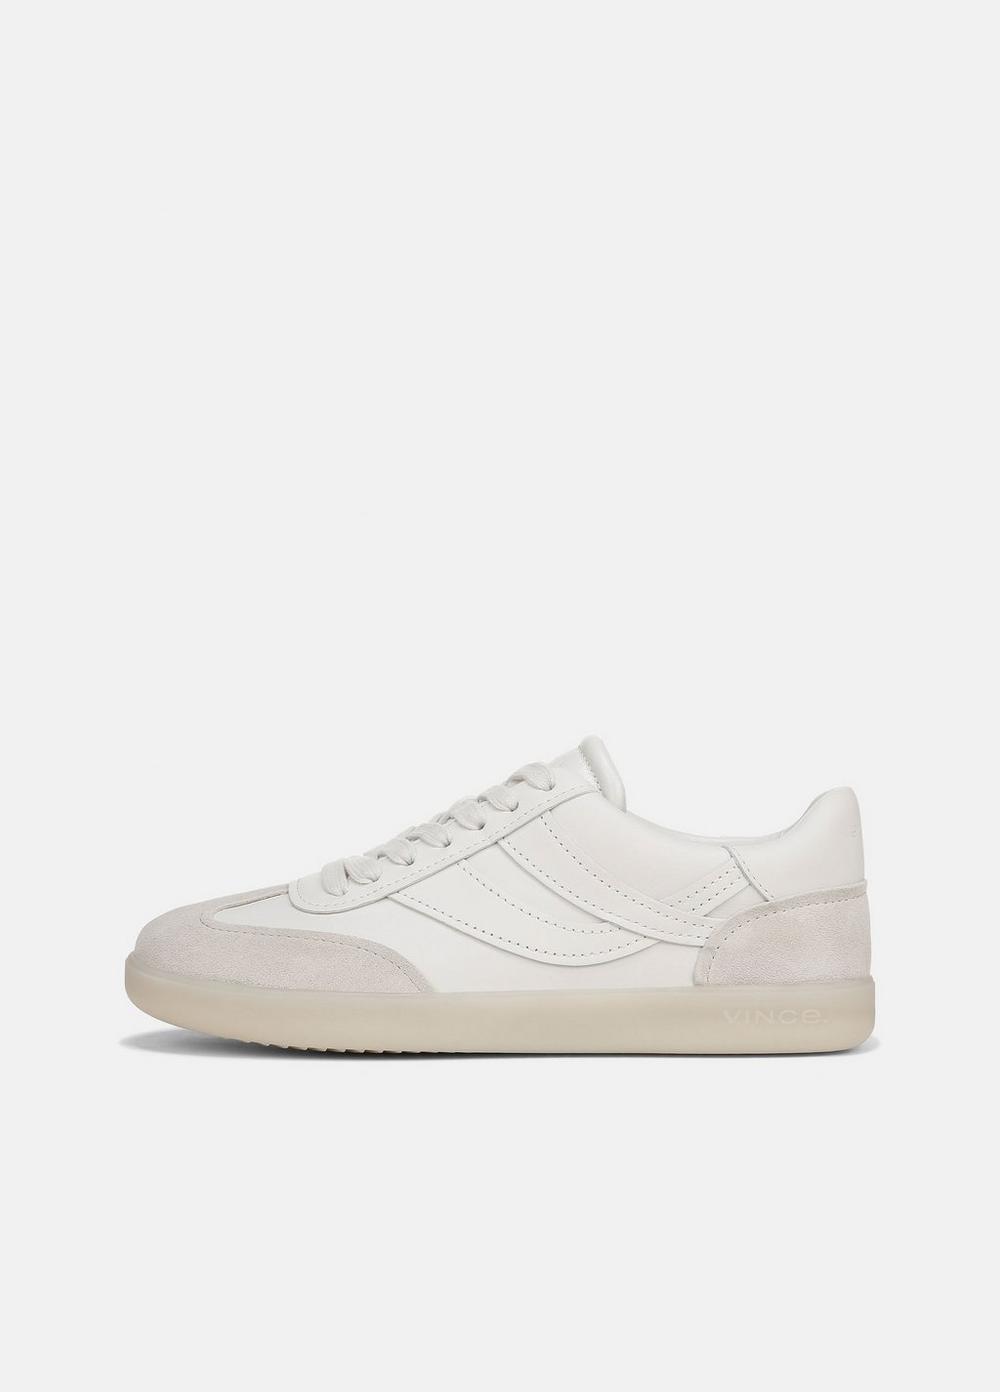 Oasis Leather And Suede Sneaker, Chalk White, Size 11 Vince